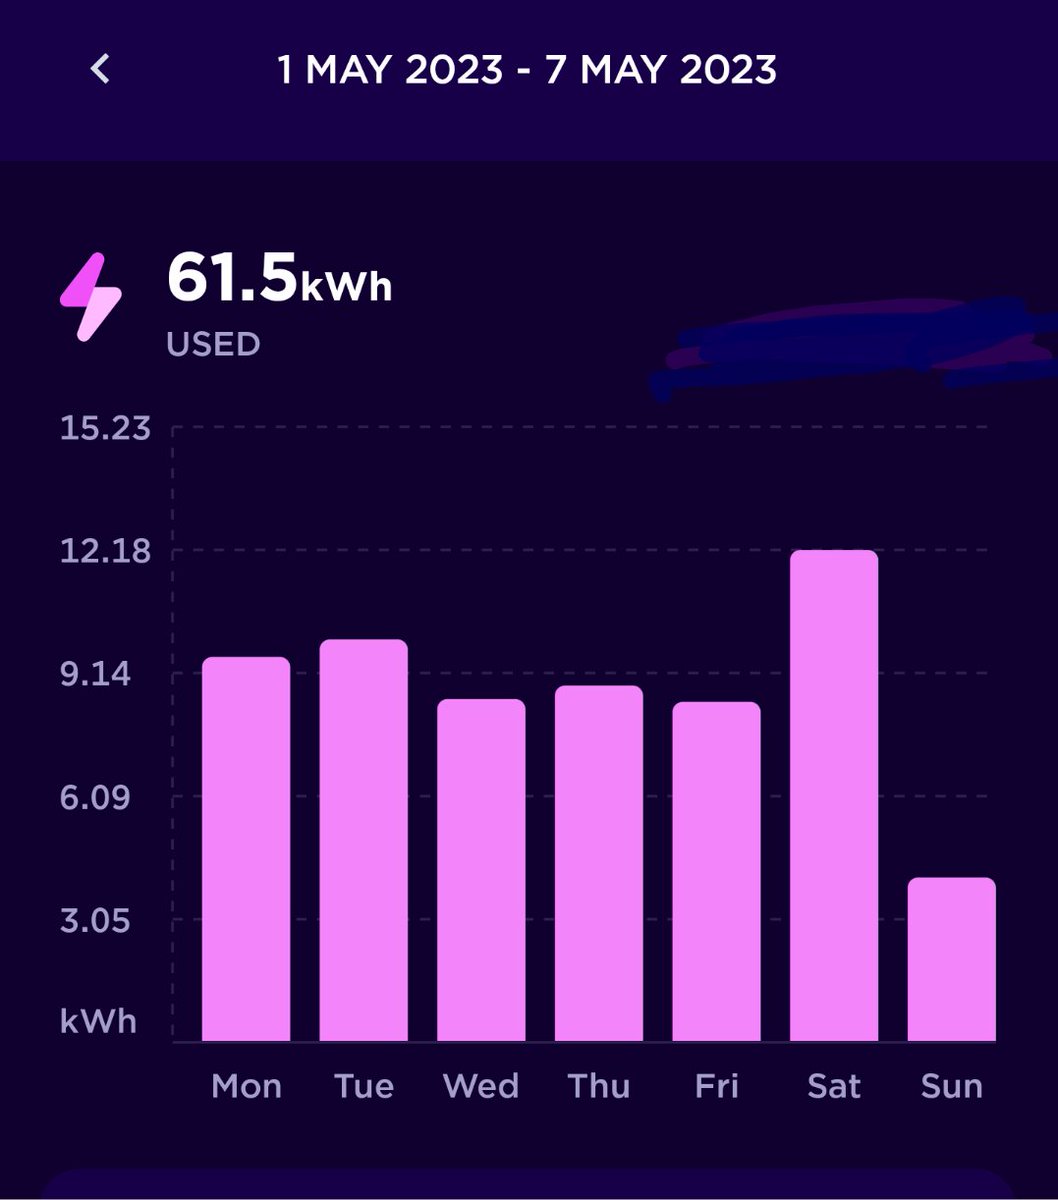 For context, all my heating, cooking and hot water is electric. I have no gas. I only used 61.5kWhrs, which is less than the 67kWhrs (7 days x 9.575kWhrs) equivalent for the week for every one of the 2.67 million homes in Scotland. Just given away for nothing. You got nothing.